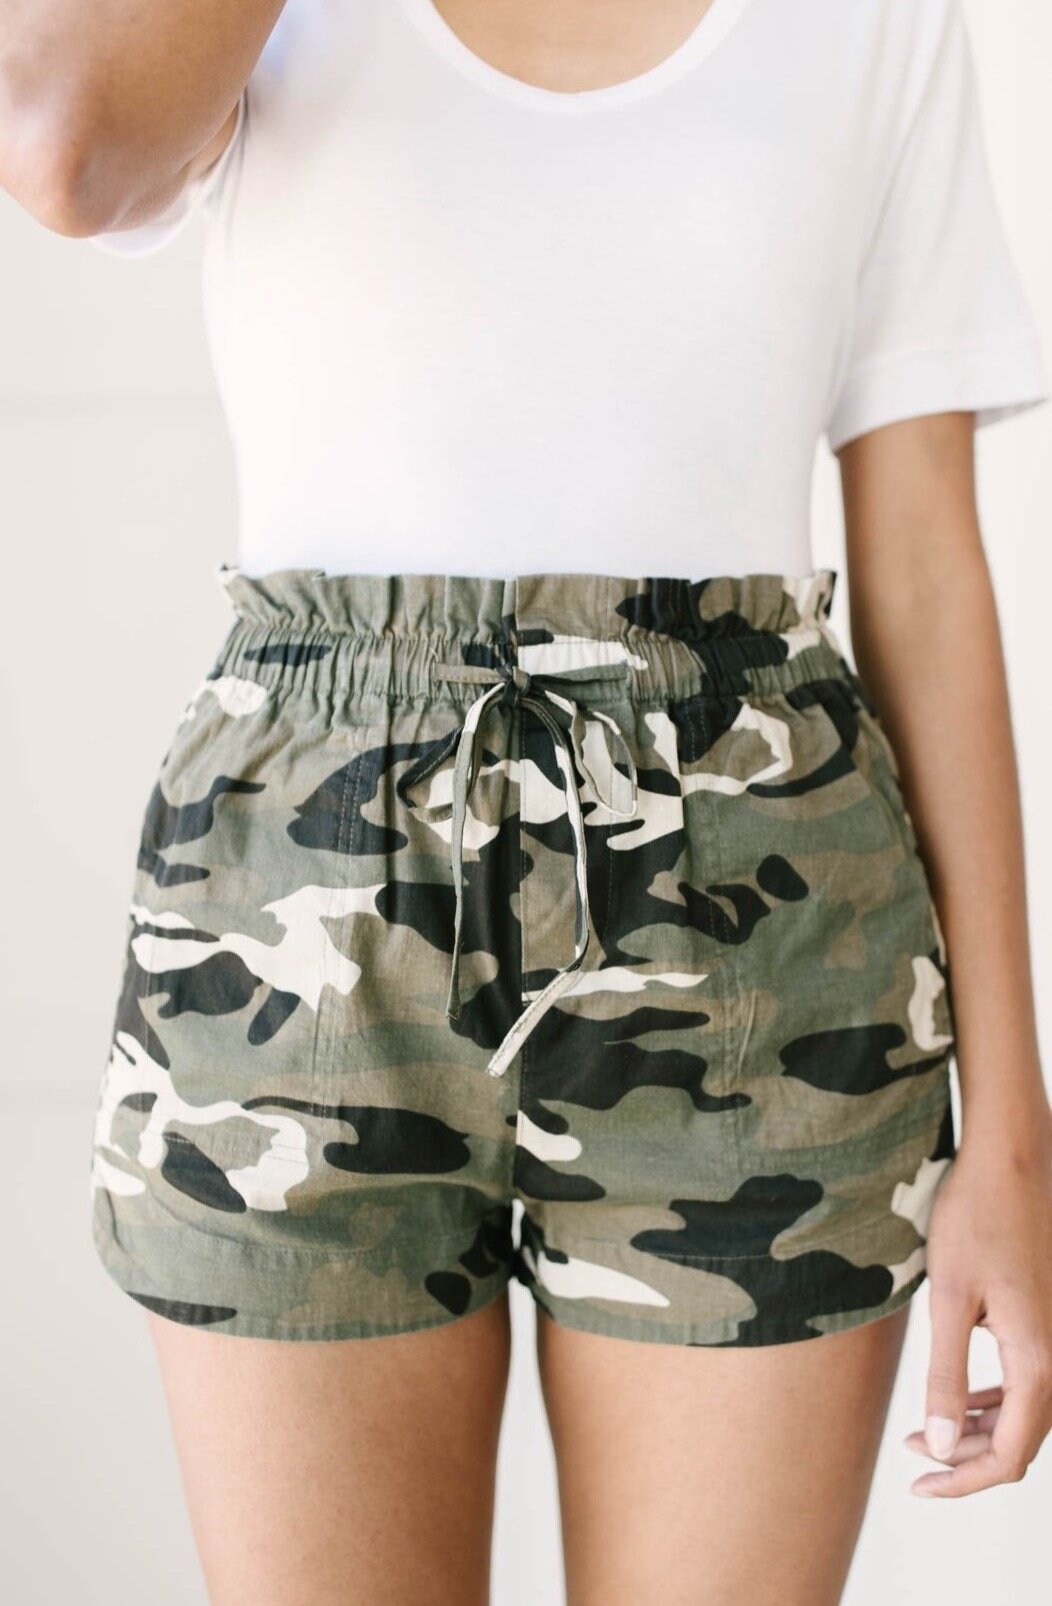 Blending in Shorts Womens Casual Camouflage Camo Comfy Cute Lightweight Cotton Summer Booty Shorts, S-3xl Plus Size